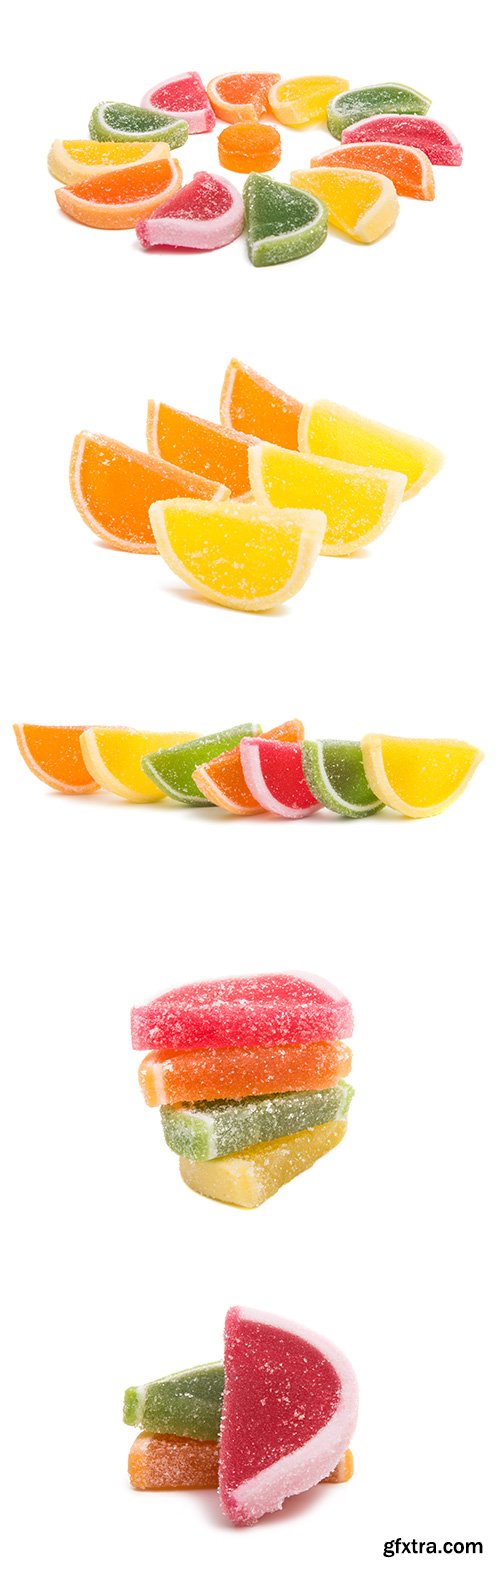 Jelly Fruit Slices Isolated - 15xJPGs